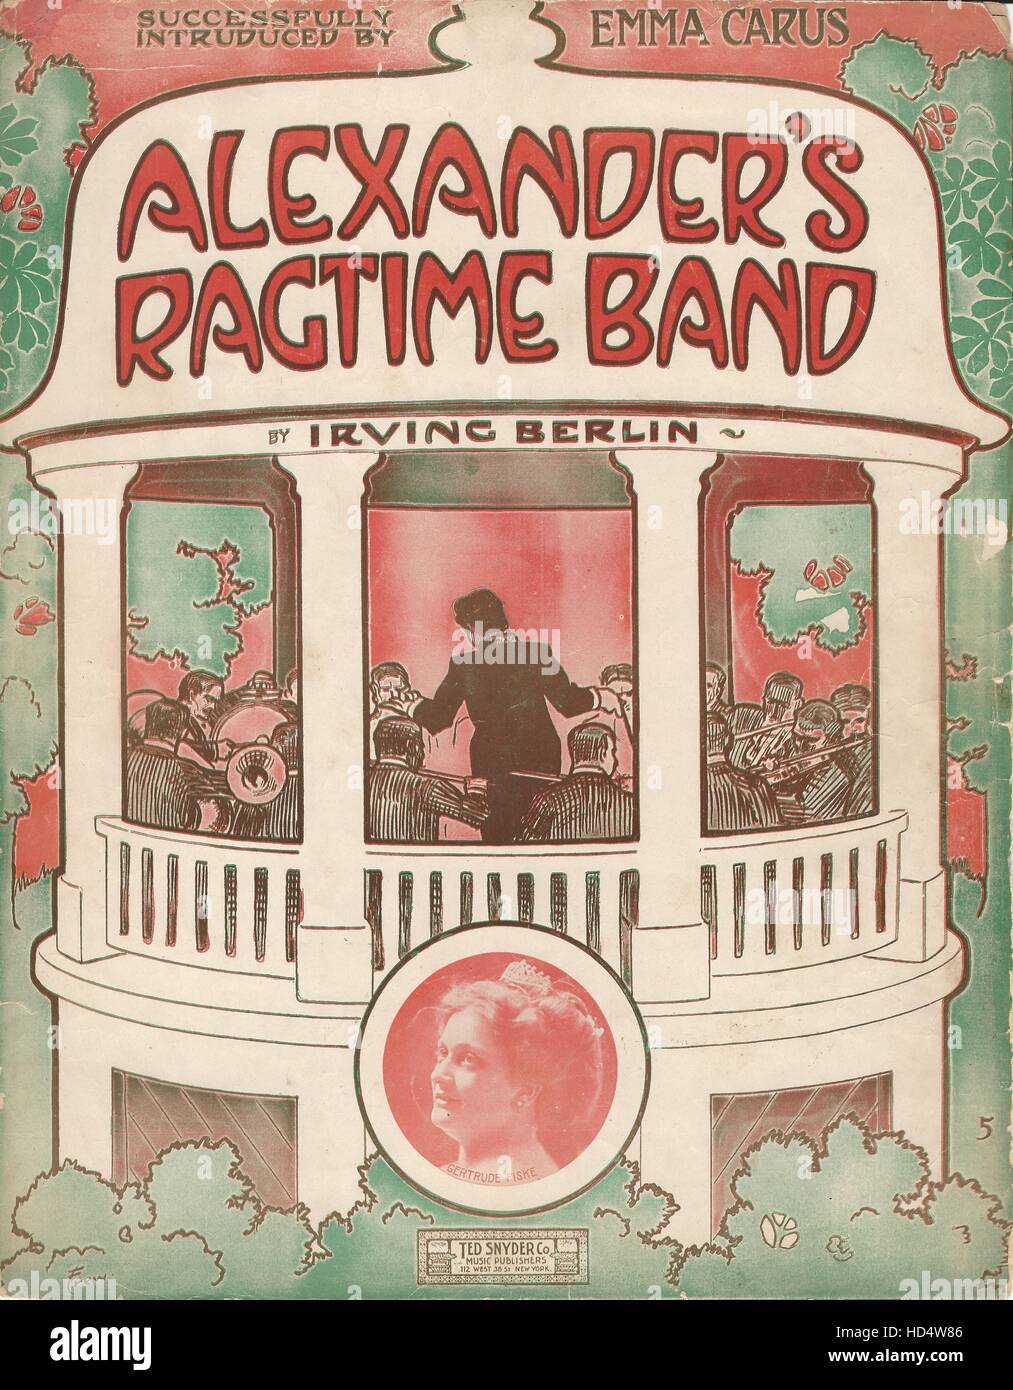 'Alexander's Ragtime Band' 1911 Irving Berlin Sheet Music Cover. Stock Photo